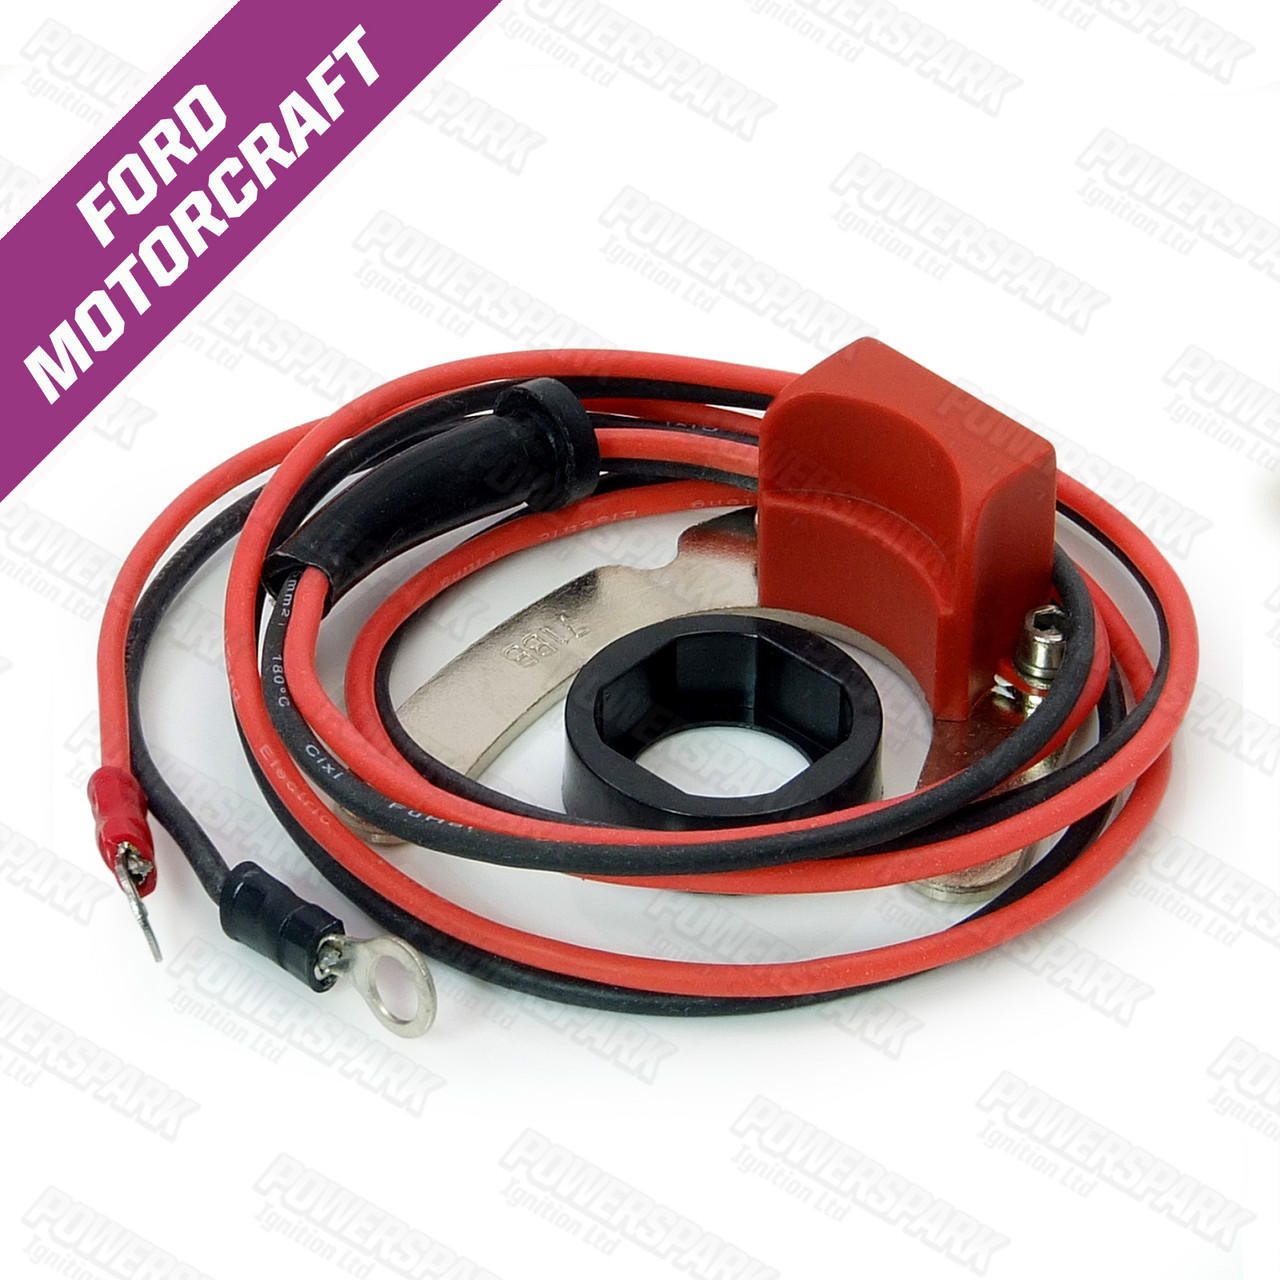  Powerspark Electronic Ignition Kit for Motorcraft 4 Cyl Distributor High Energy (K12H)